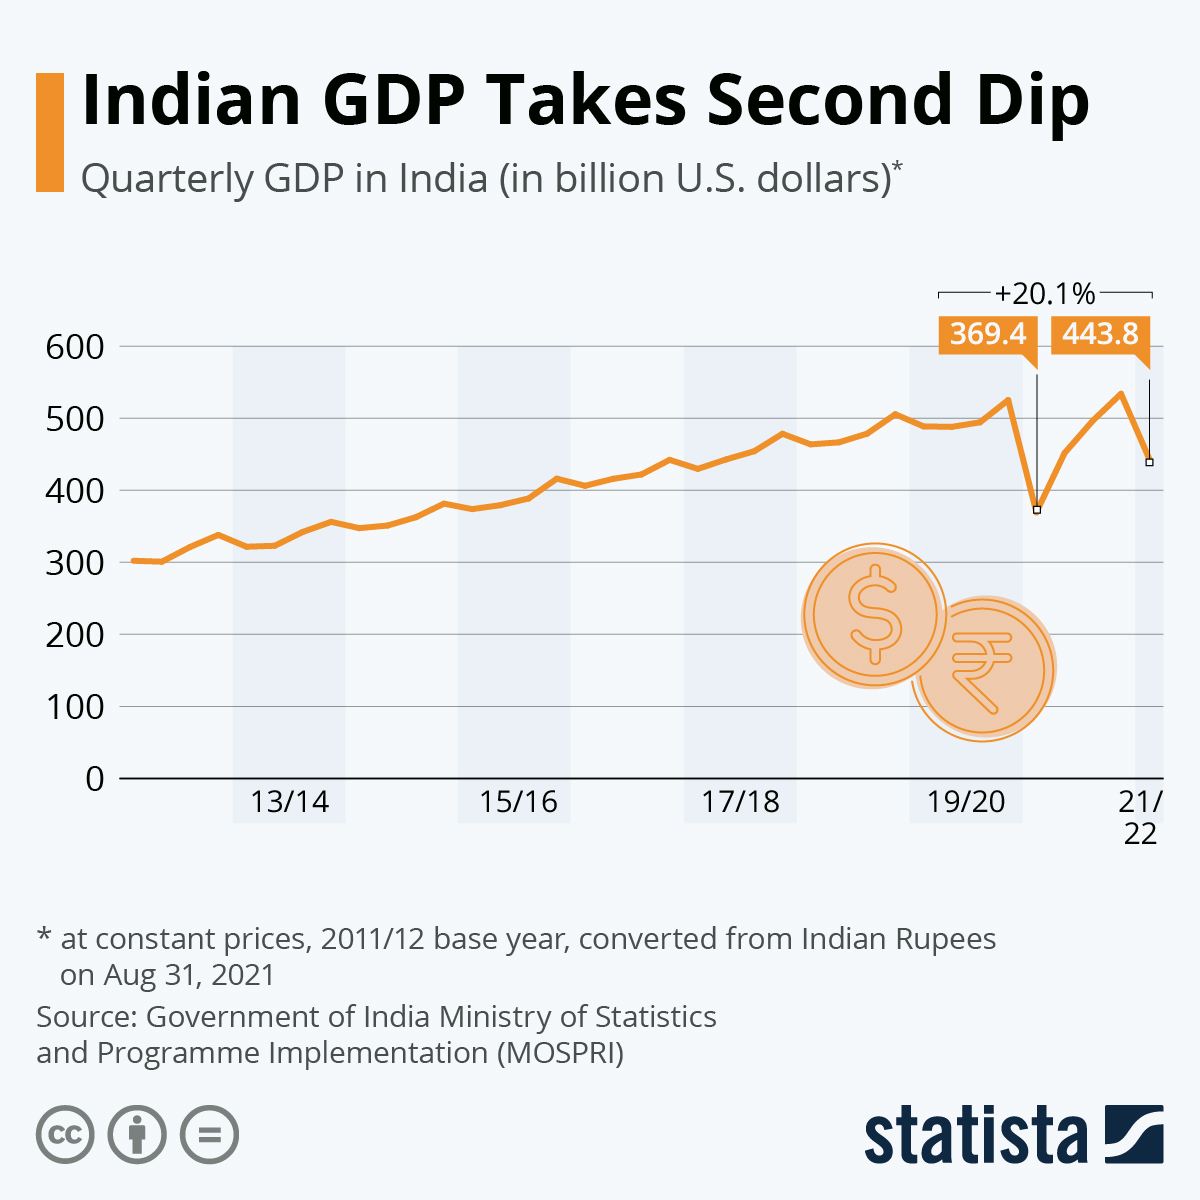 Indian GDP Takes Second Dip